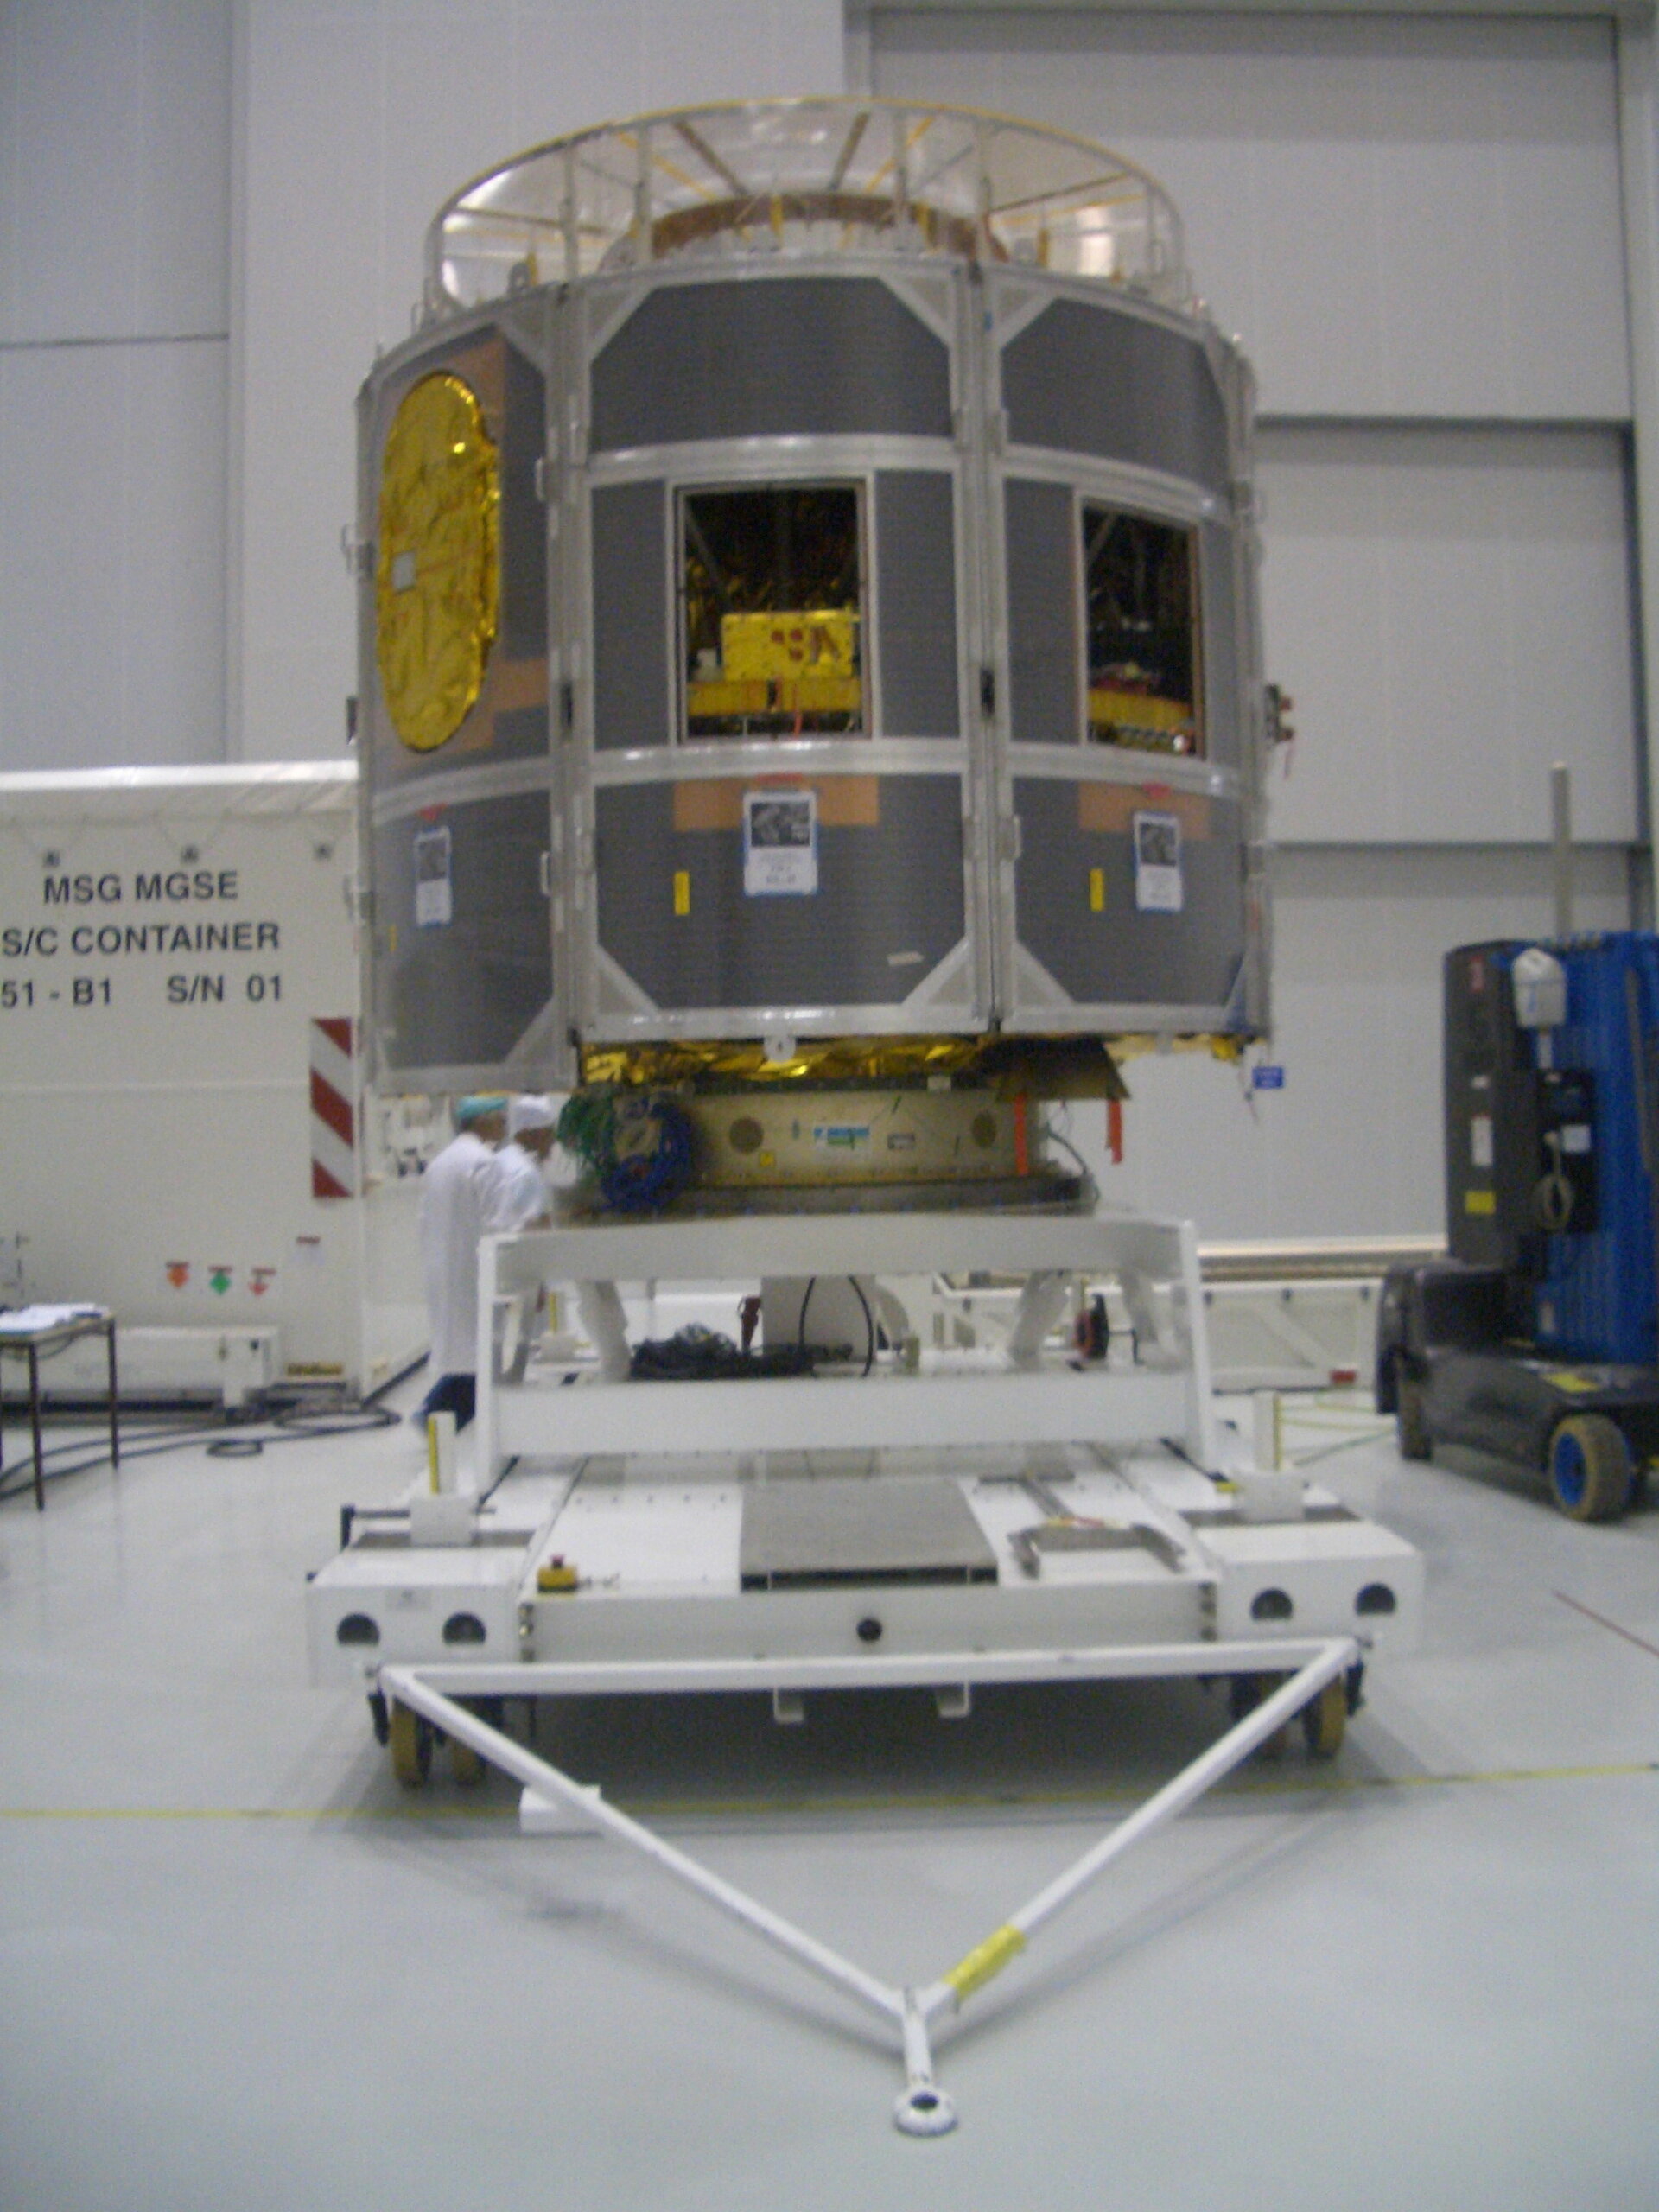 MSG-2 installation on the trolley